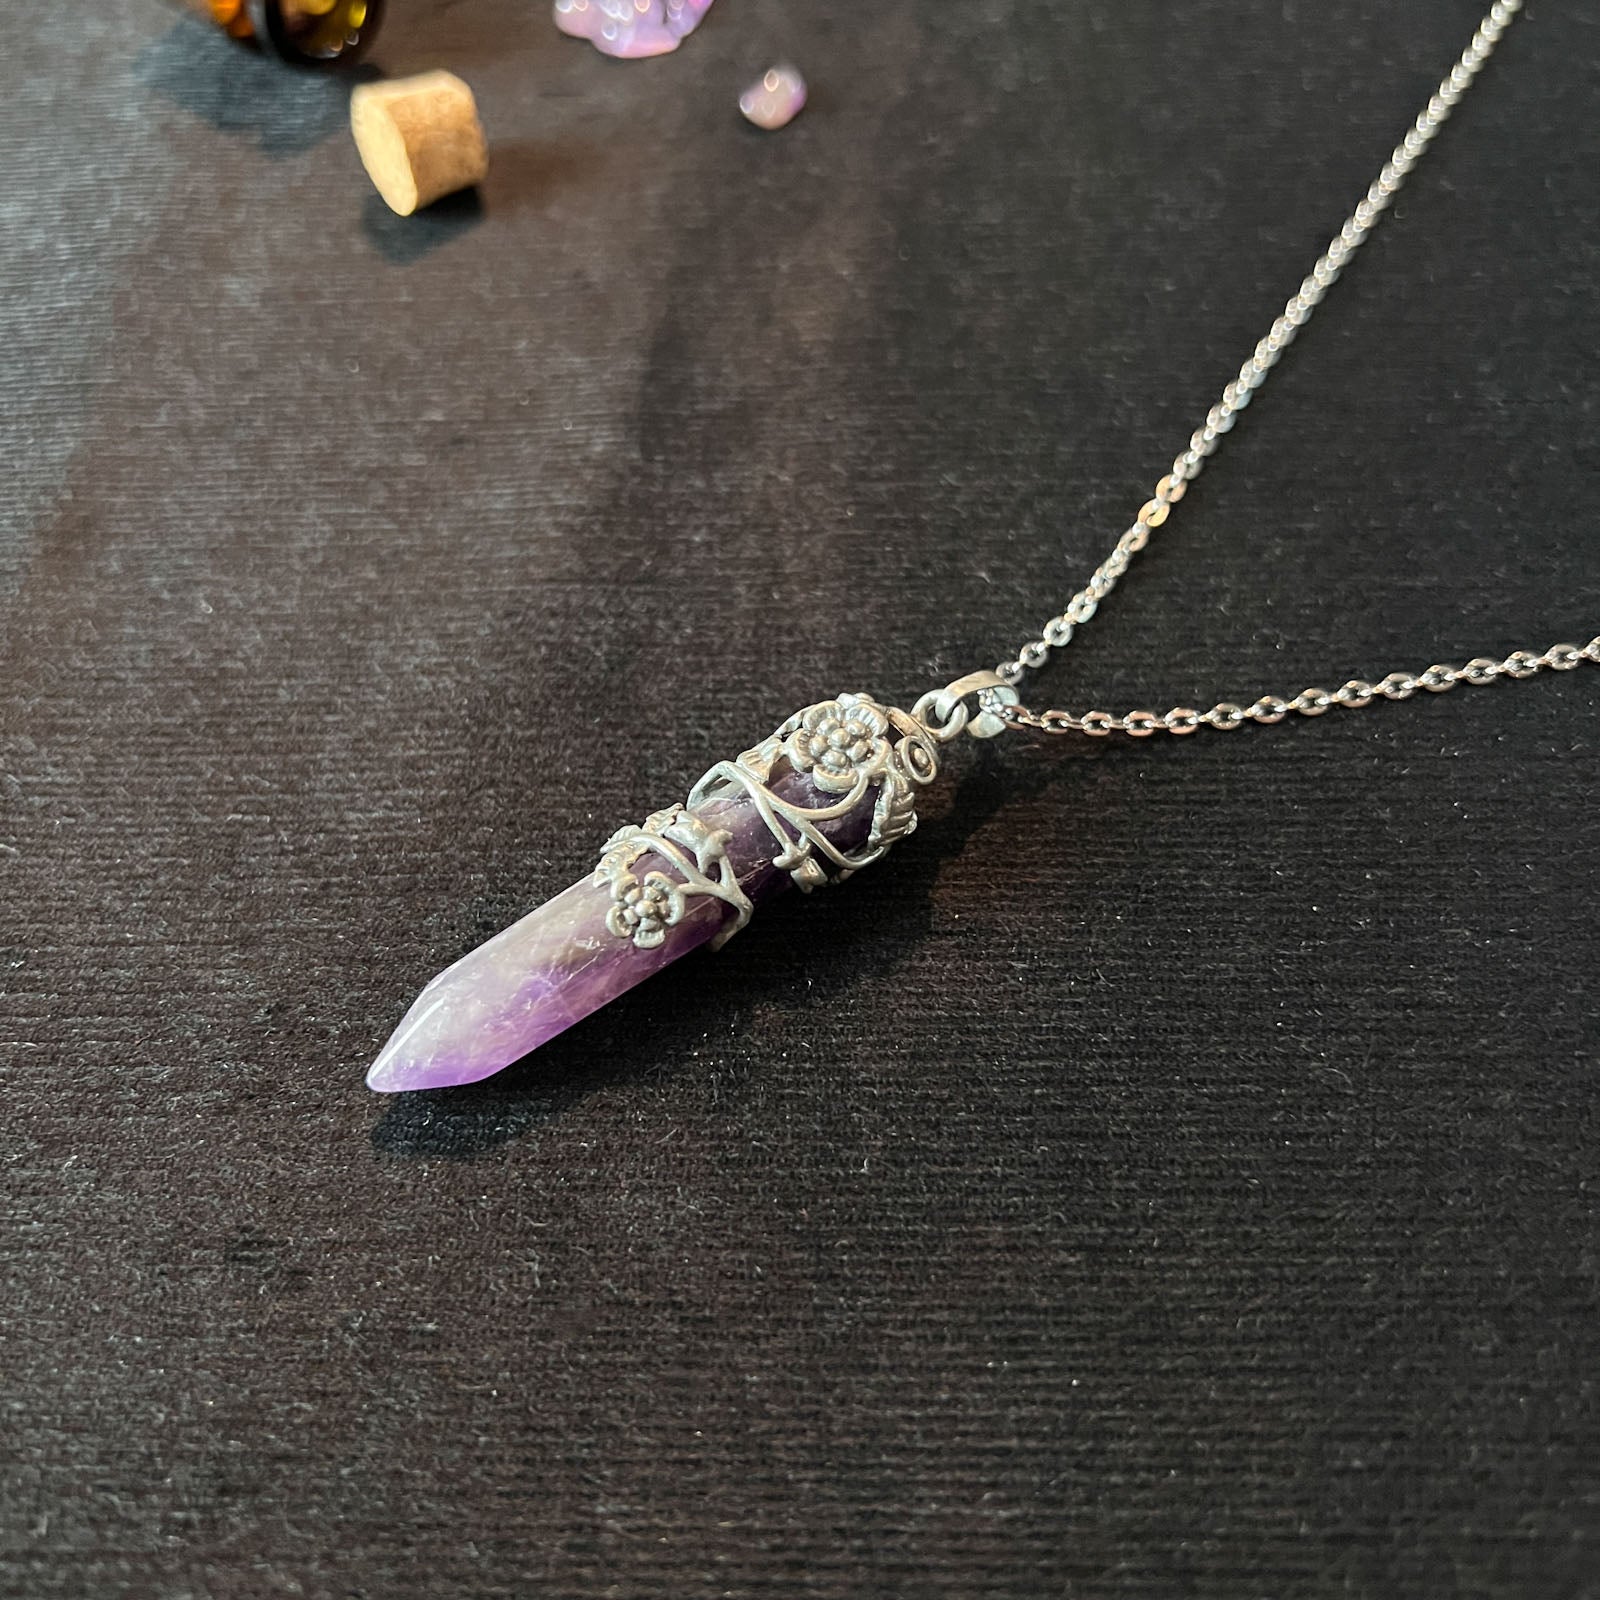 Gemstone floral necklace amethyst pendant witchy jewelry necklace pagan gothic pendant